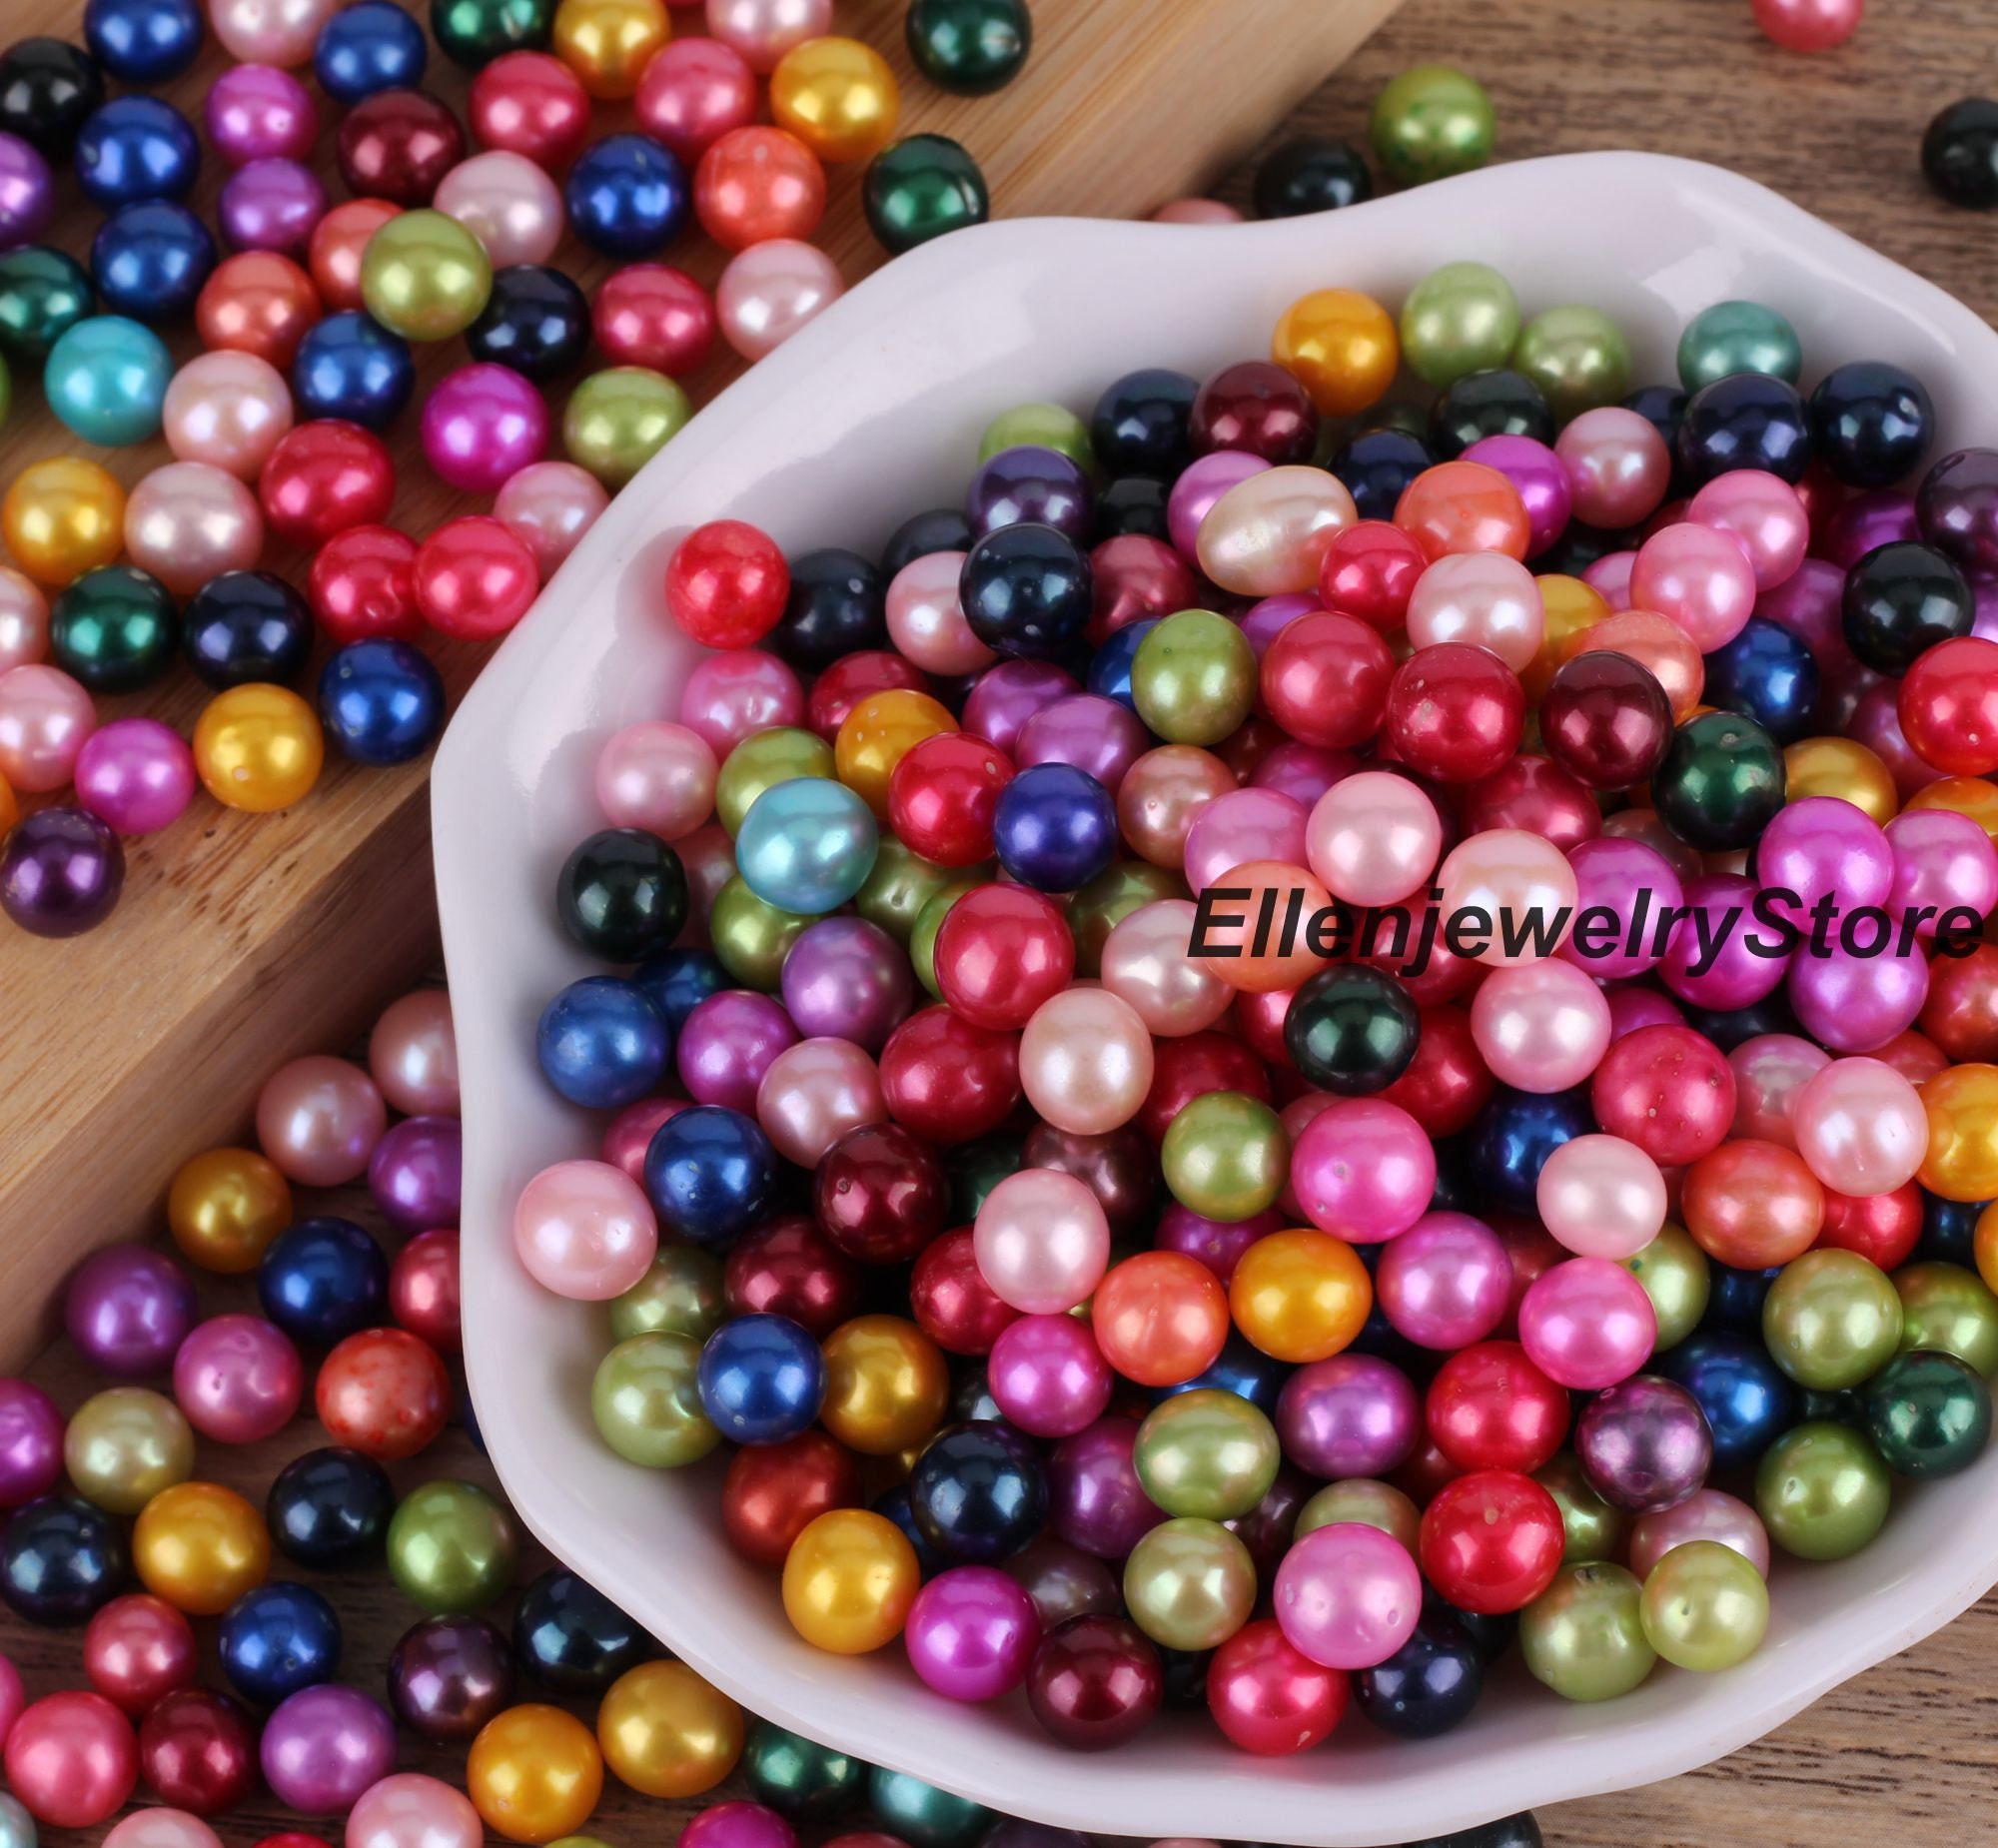  XSEINO Pearl Beads，3200PCS 8mm and 6mm，46 Colors Multicolor Pearl  Beads Loose Pearls for Crafts with Holes for Jewelry Making, Small Pearl  Filler Beads for Crafting Bracelet Necklace Earrings